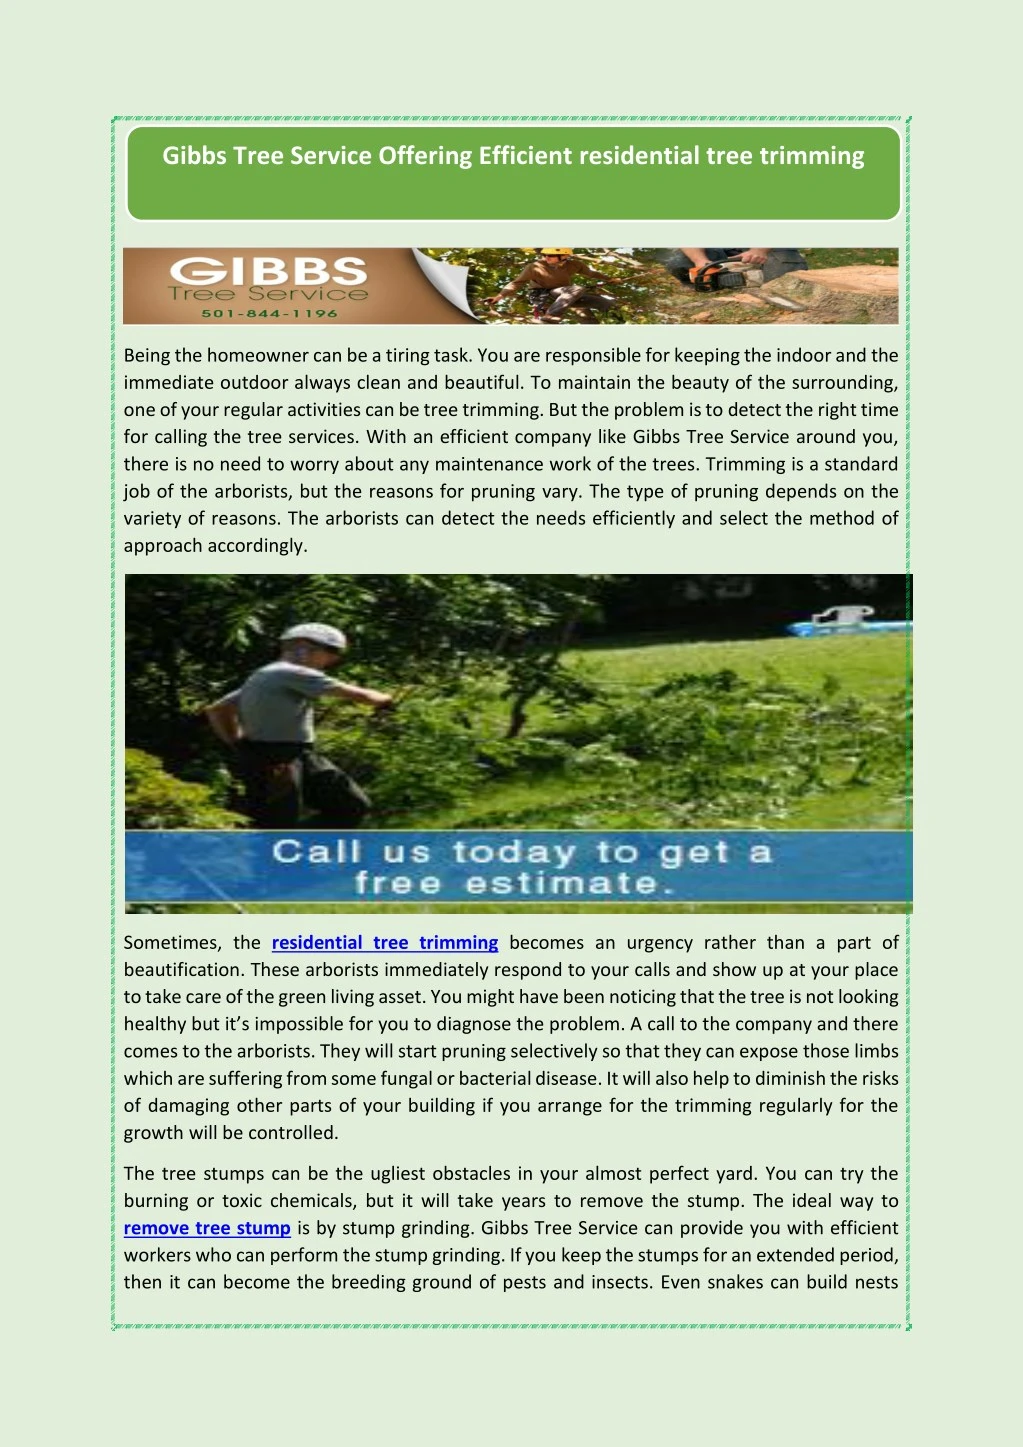 gibbs tree service offering efficient residential